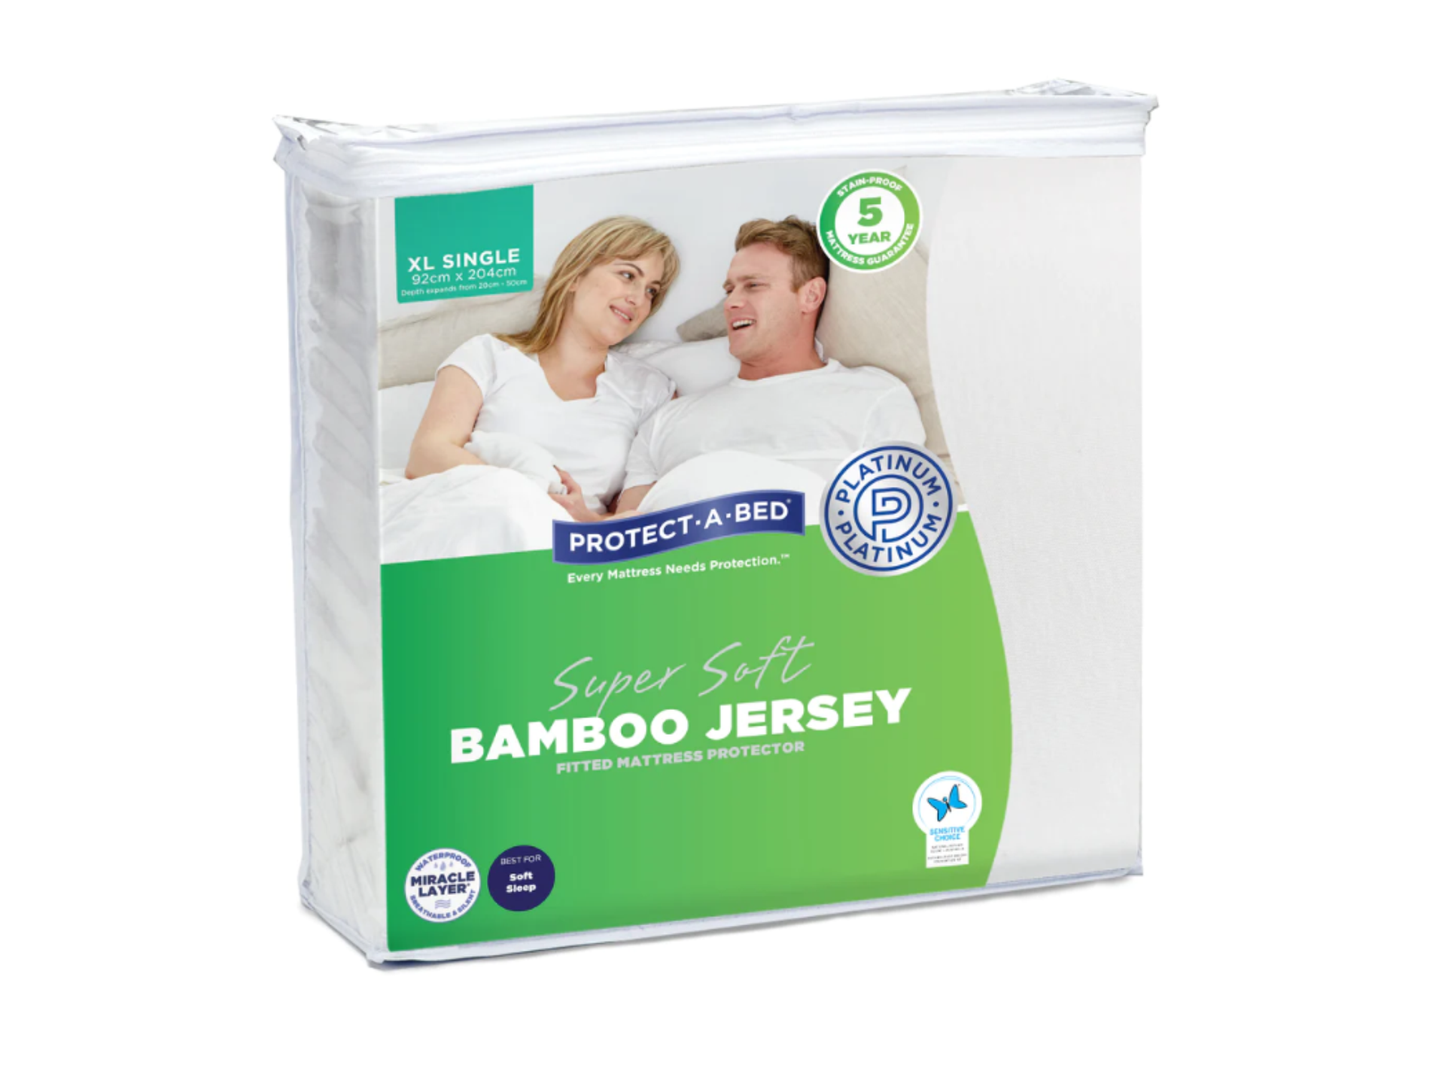 Protect-A-Bed Bundle featuring Bamboo Jersey Protectors King Single